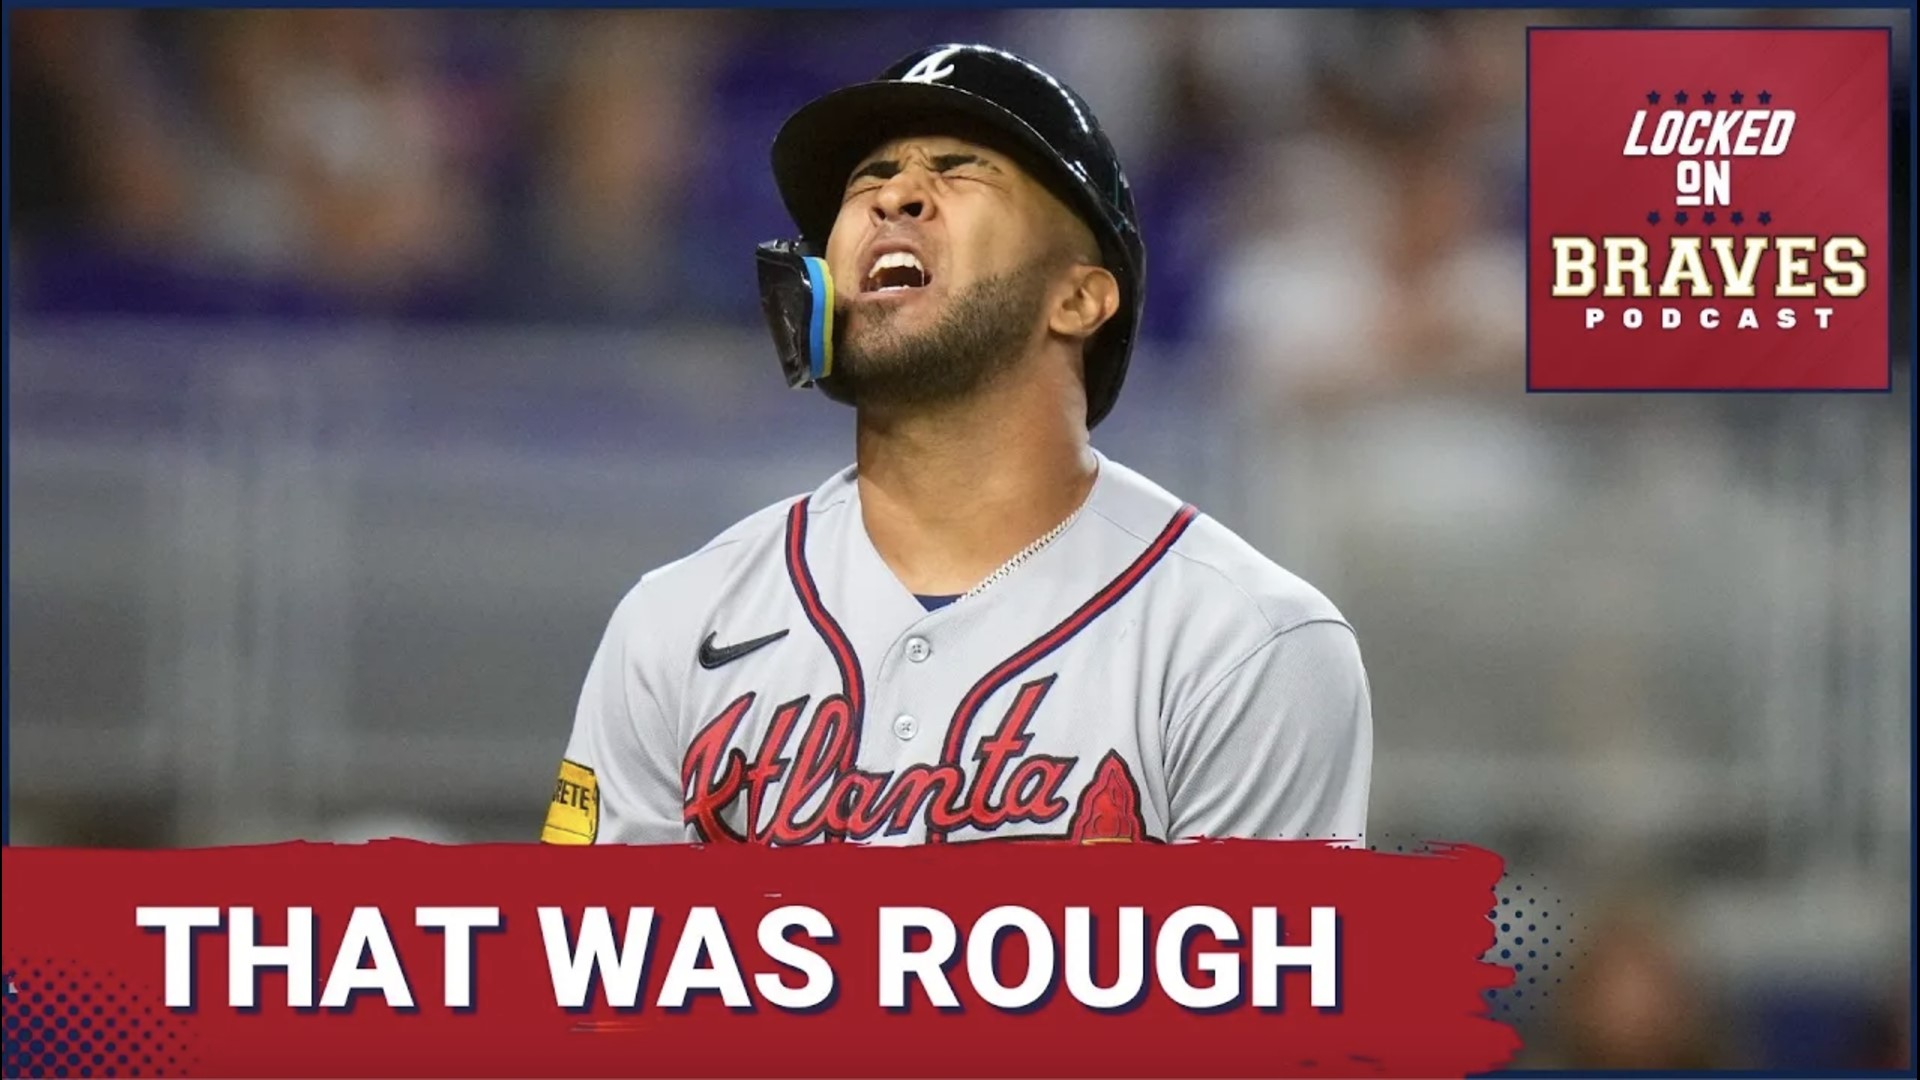 Not only did the Atlanta Braves get embarrassed in Miami, but they lost Ronald Acuna Jr. to injury and had to push back Max Fried's next start.